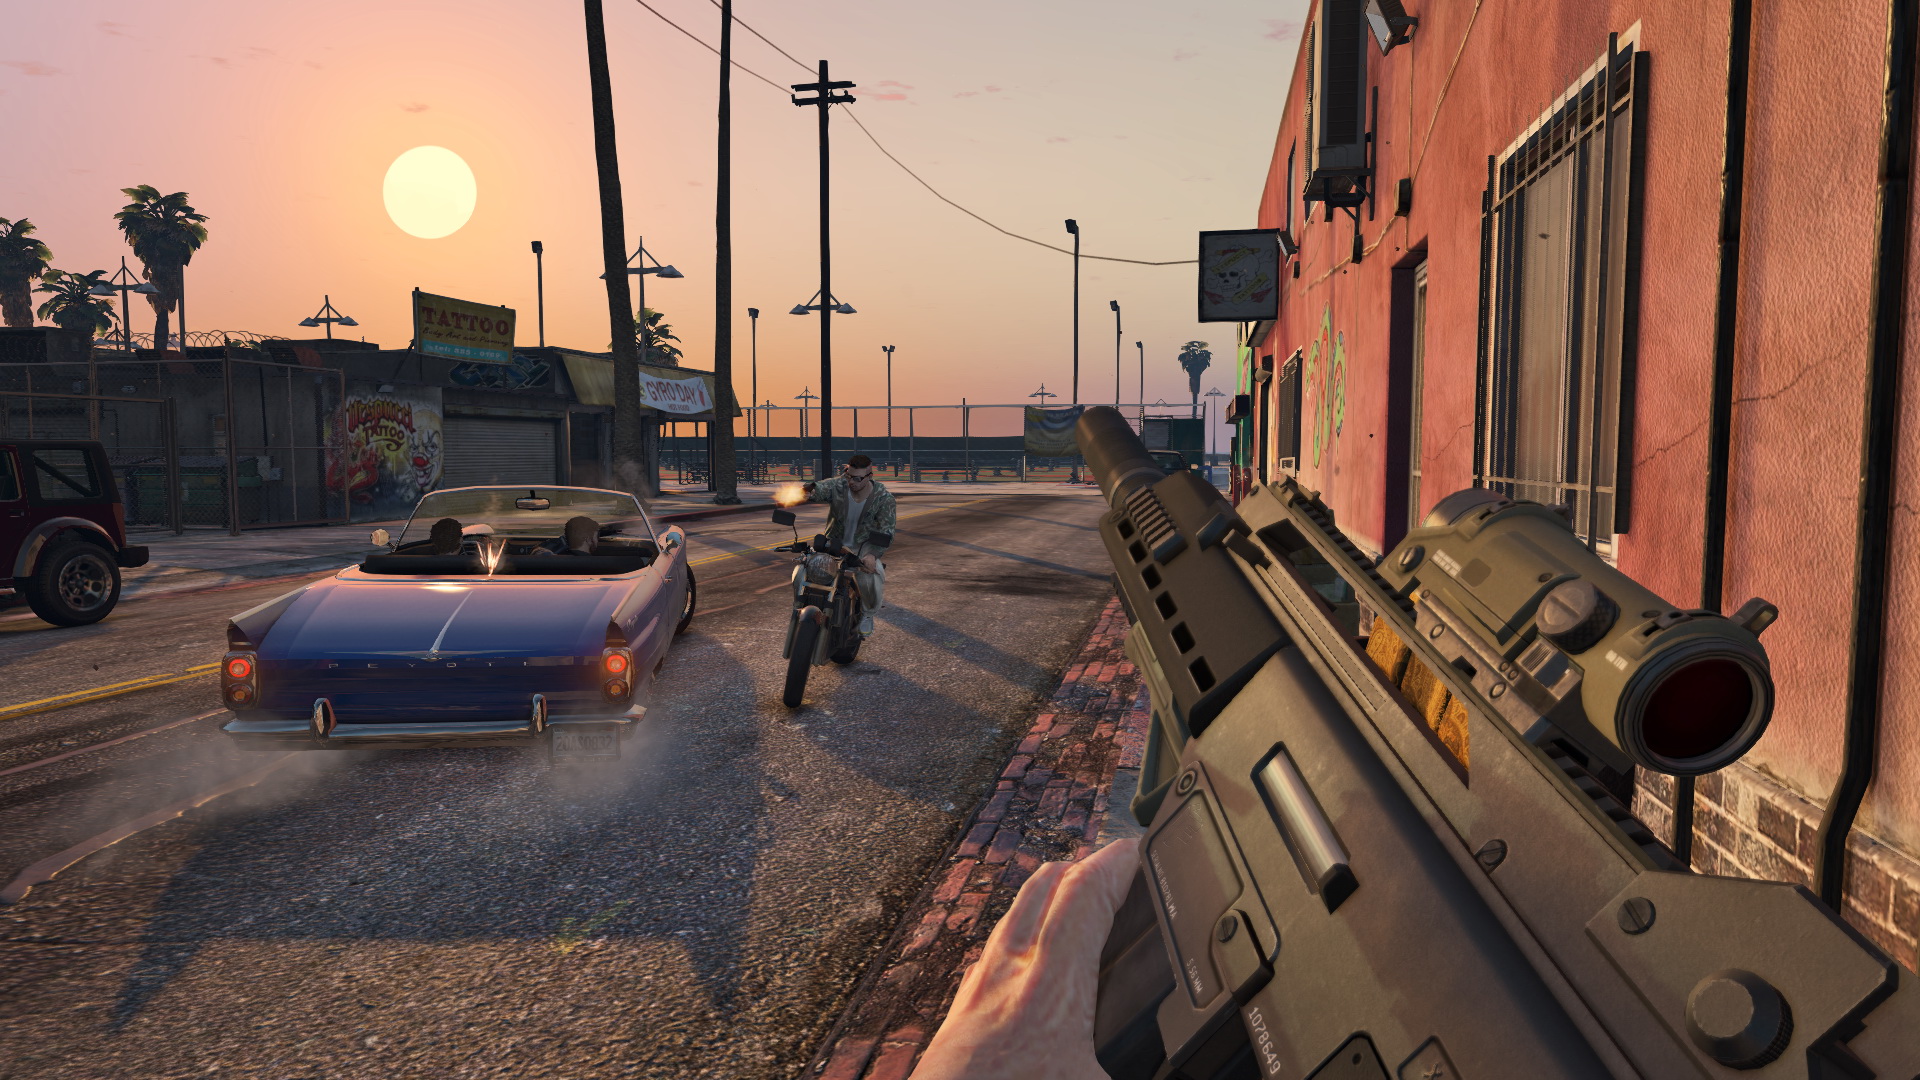 GTA 5 Xbox One/PS4/PC Has First-Person Mode - GameSpot